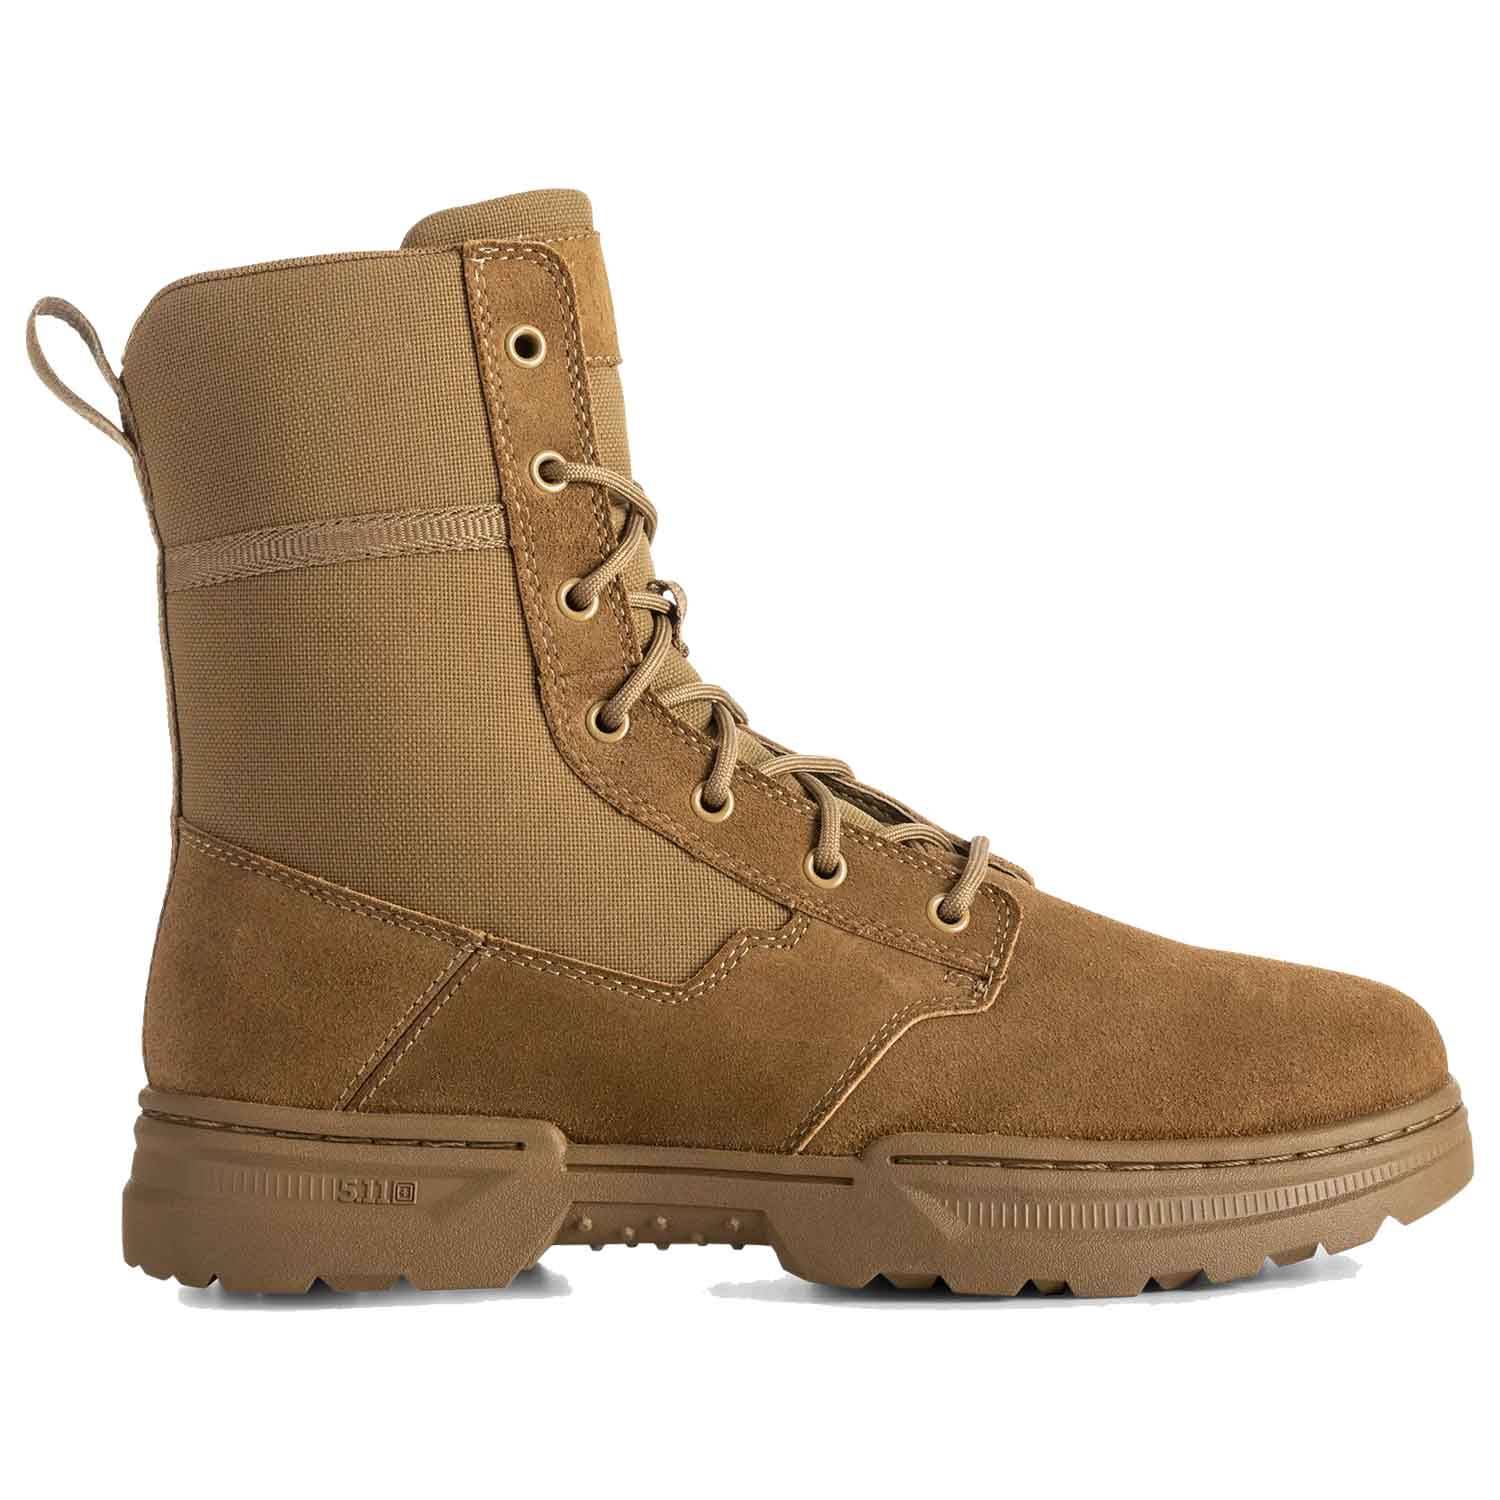 5.11 Tactical Speed 4.0 8" AR 670-1 Boots